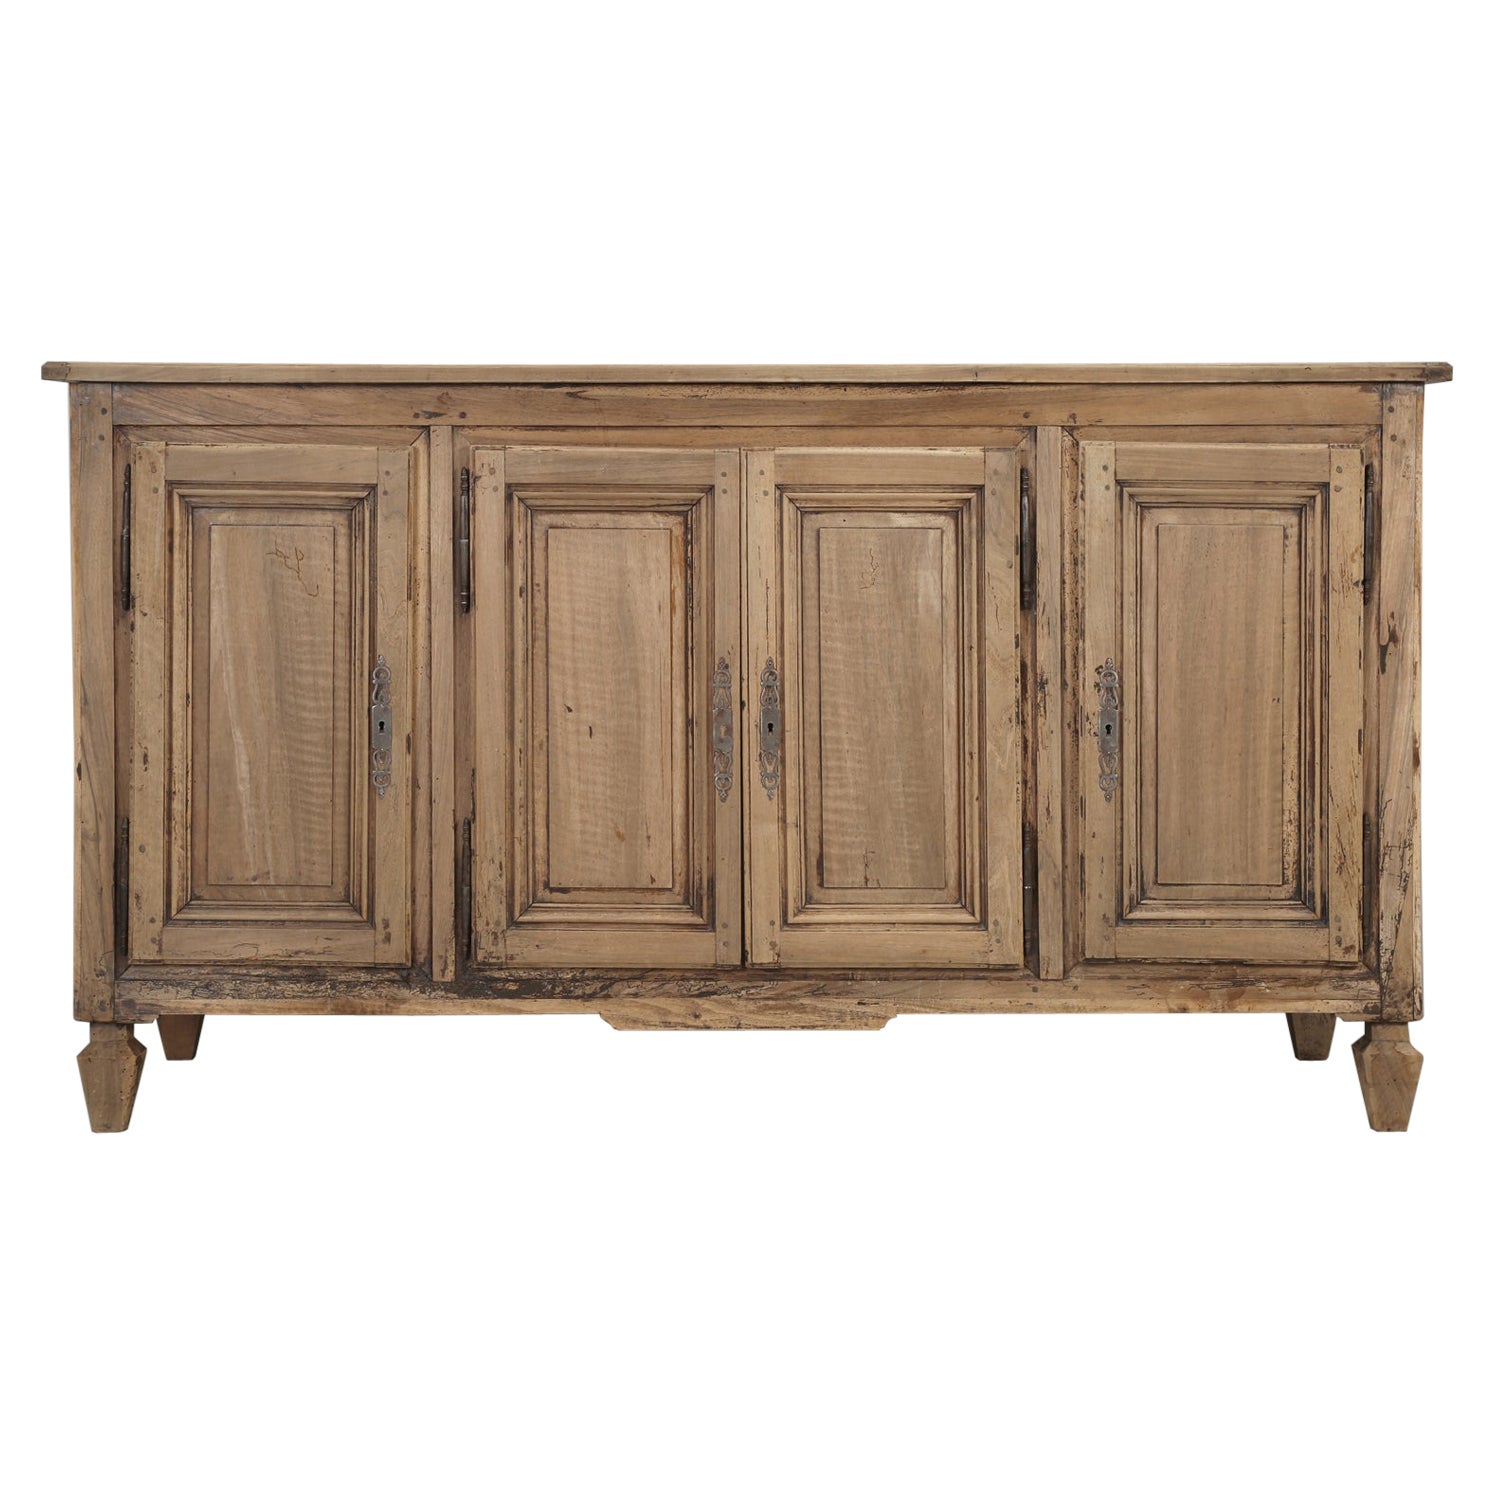 Antique French Walnut Buffet in Restored Structurally and Cosmetically Original